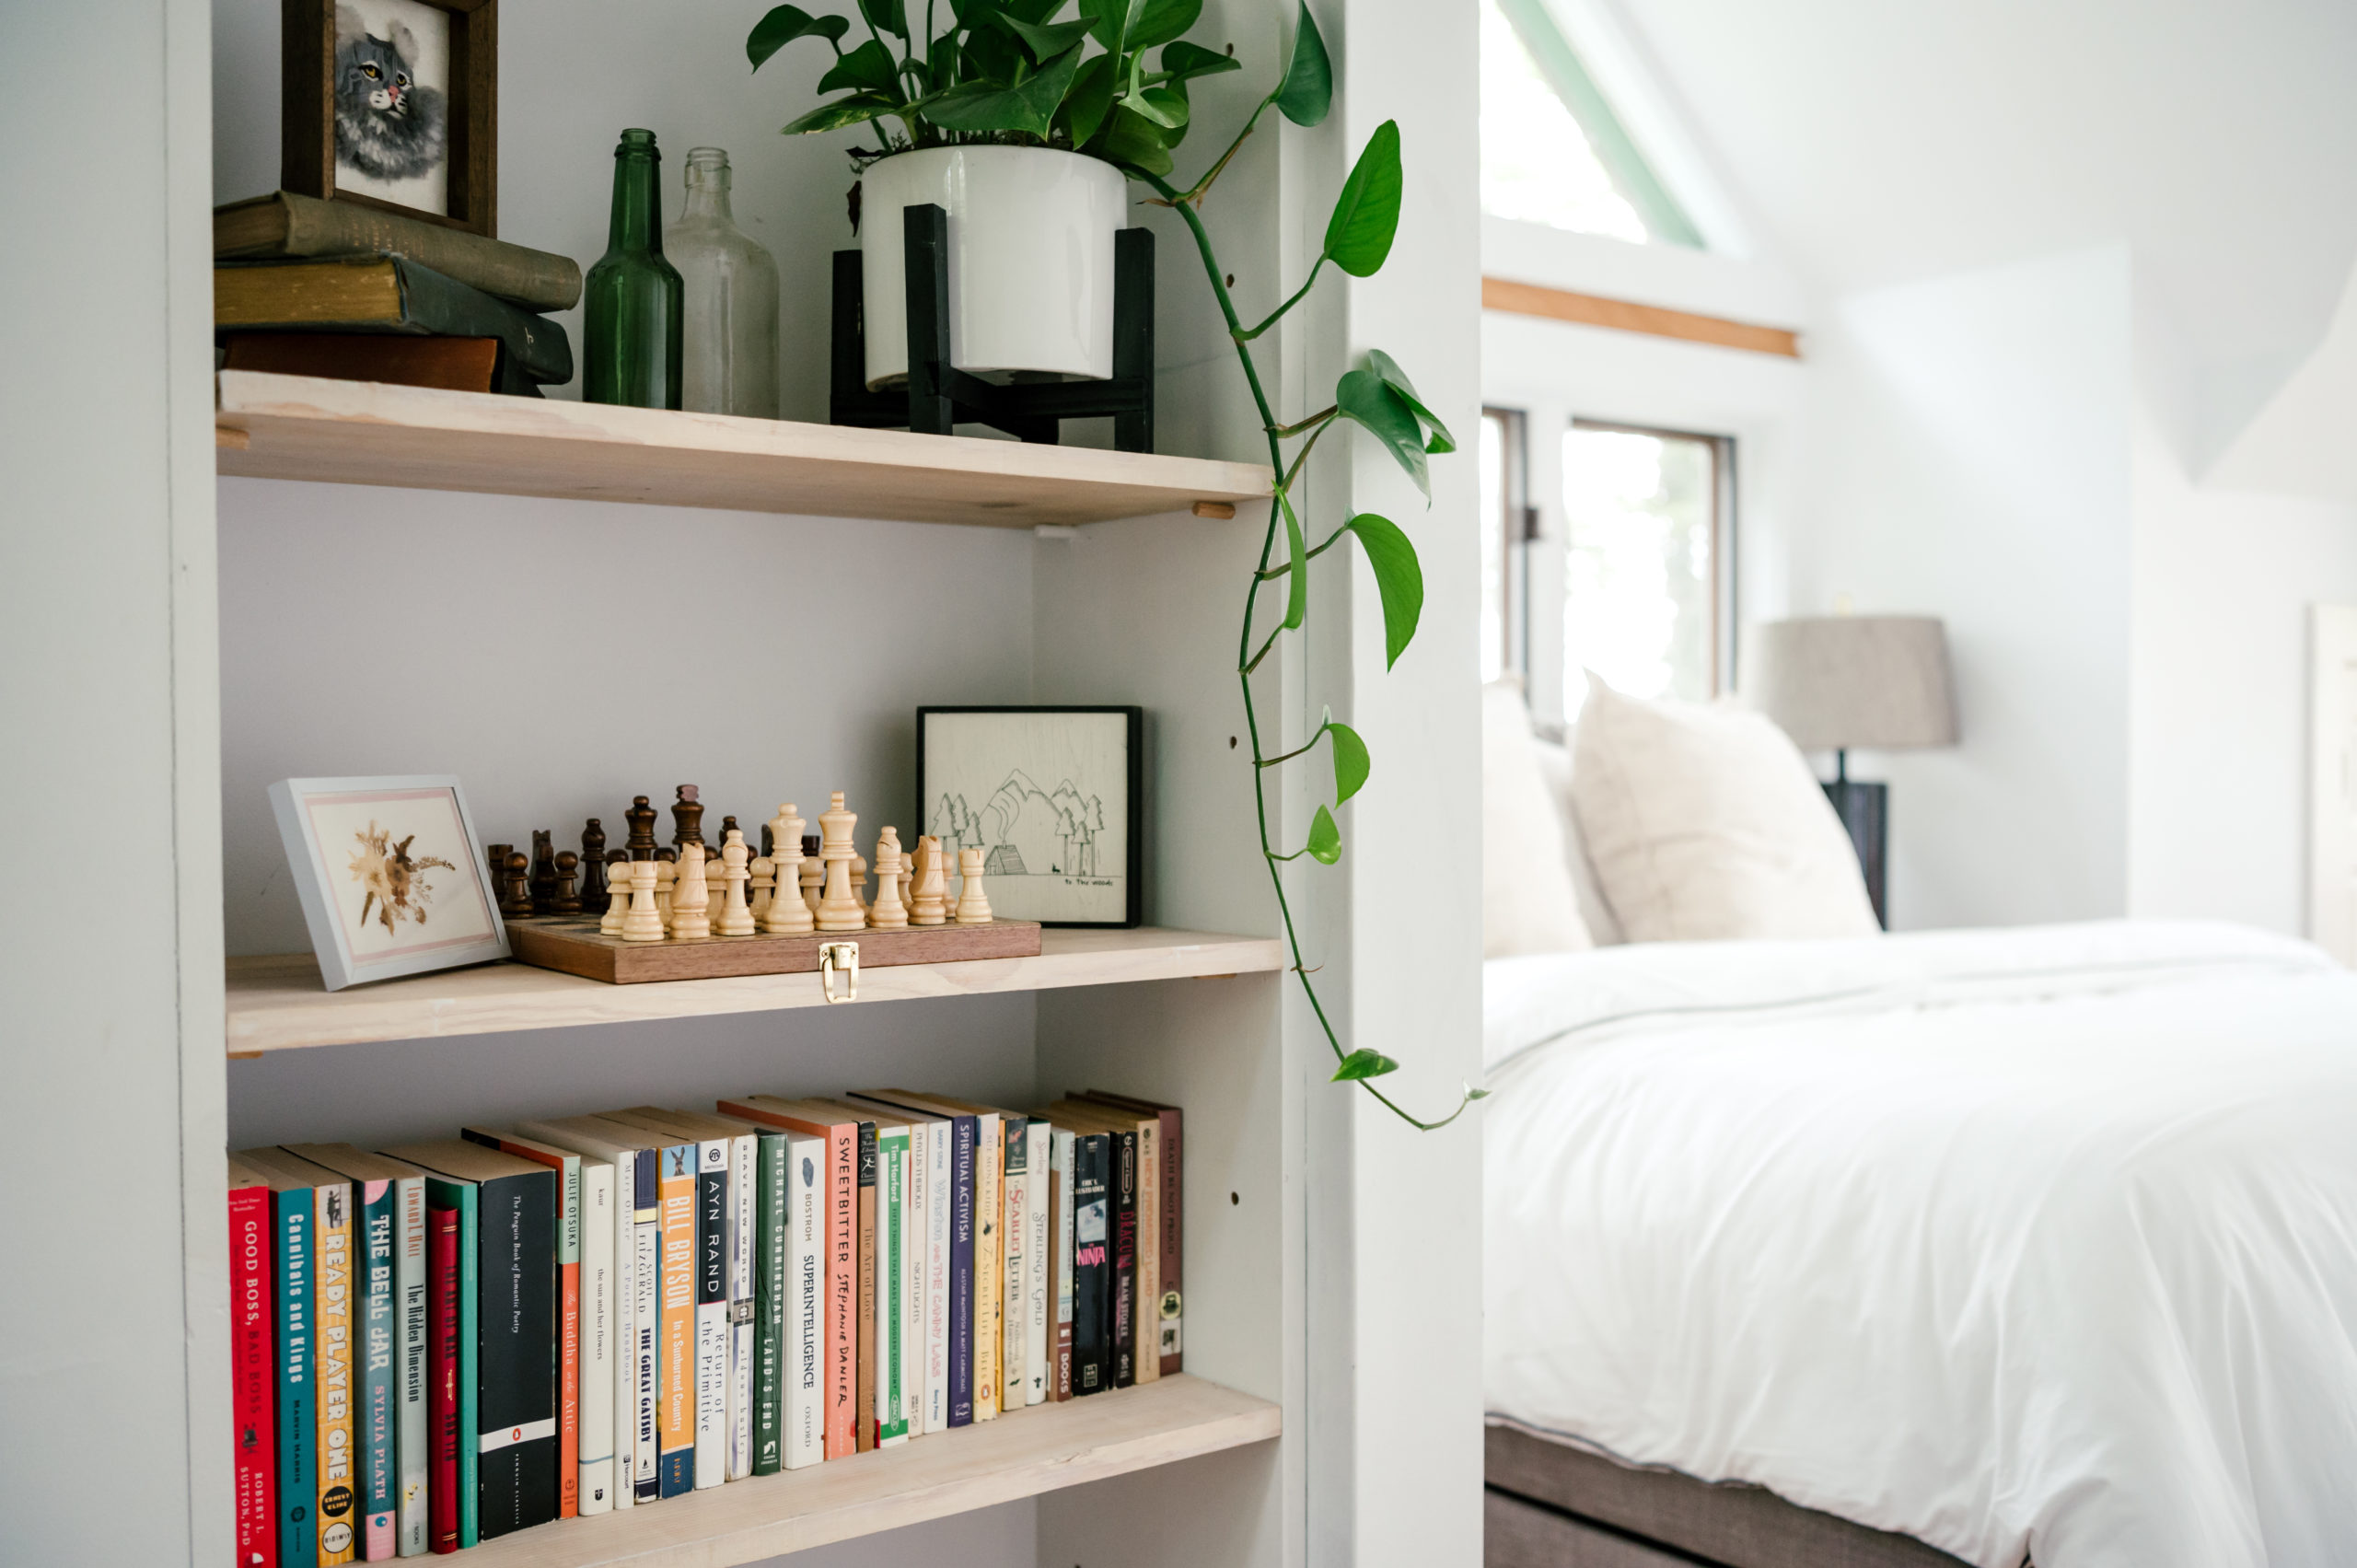 Photo of bedroom interior decor such as books and a chess board sitting on the shelves, and bed with white cover in the background